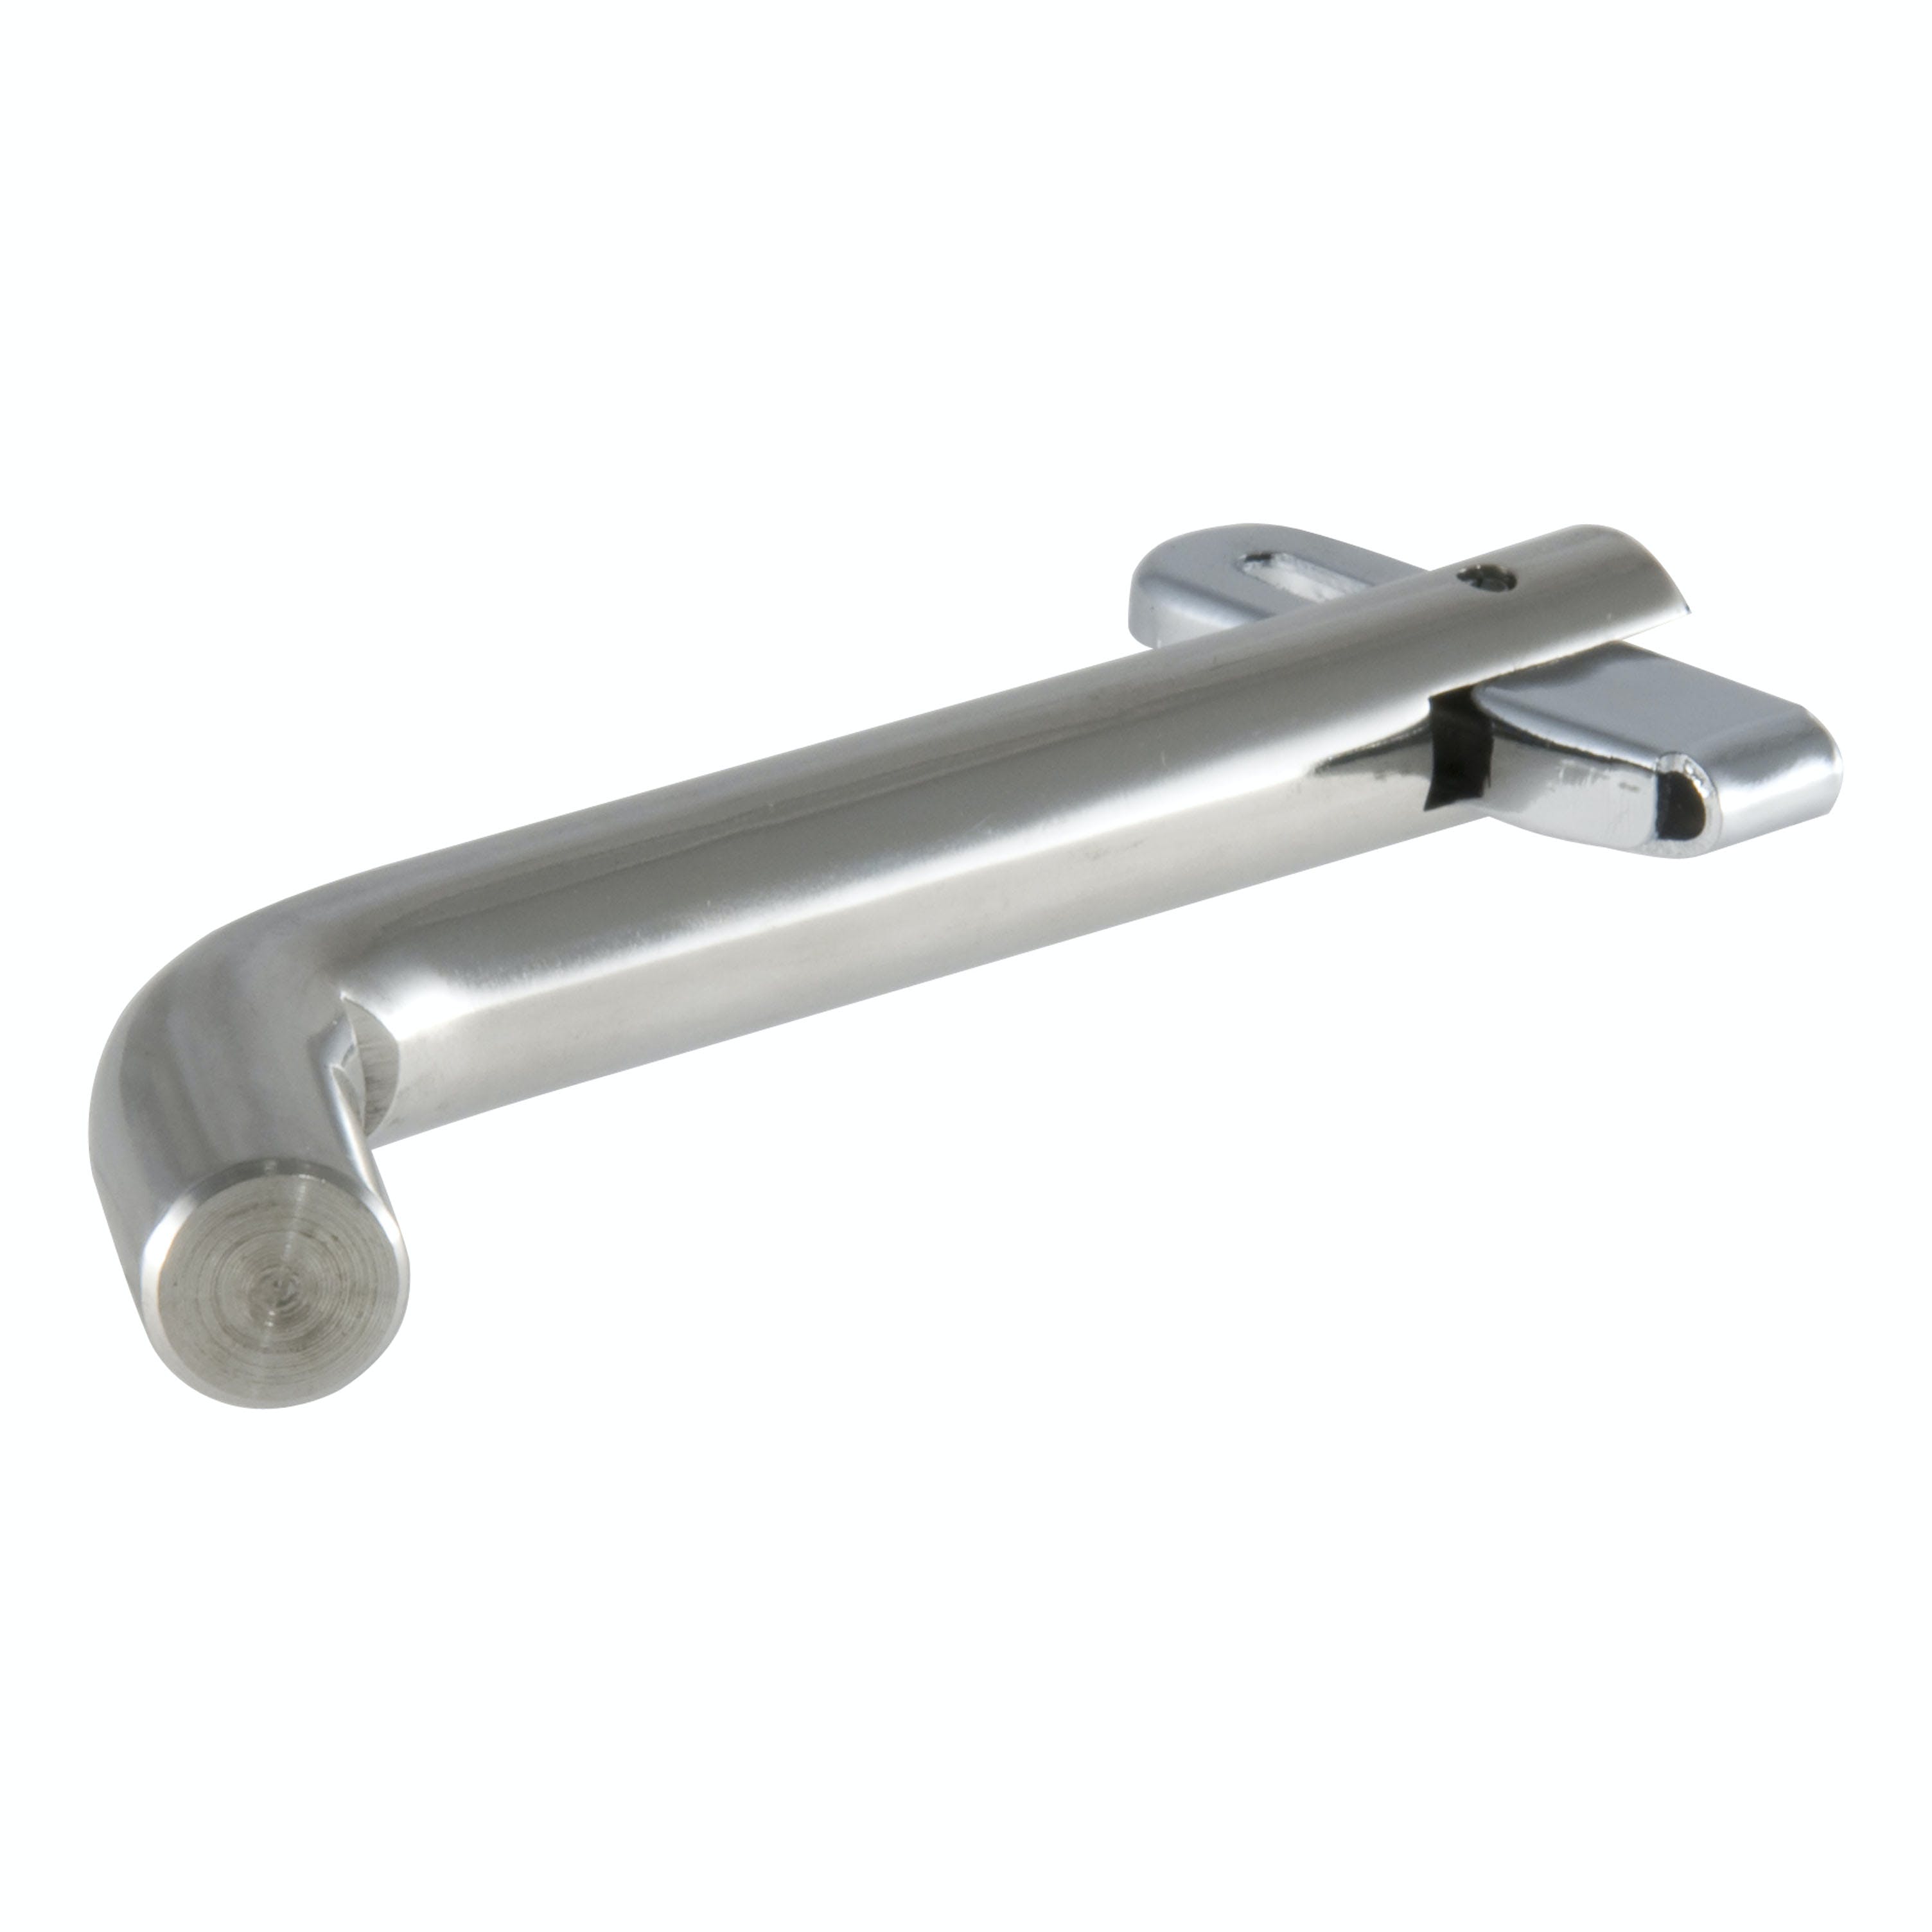 CURT 23581 1/2 Swivel Hitch Pin (1-1/4 Receiver, Stainless, Packaged)